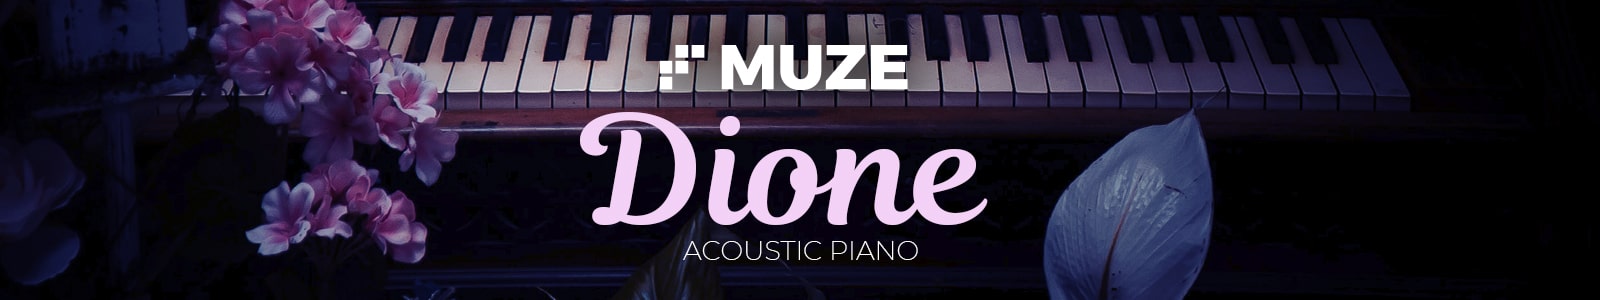 Dione Acoustic Piano by MUZE